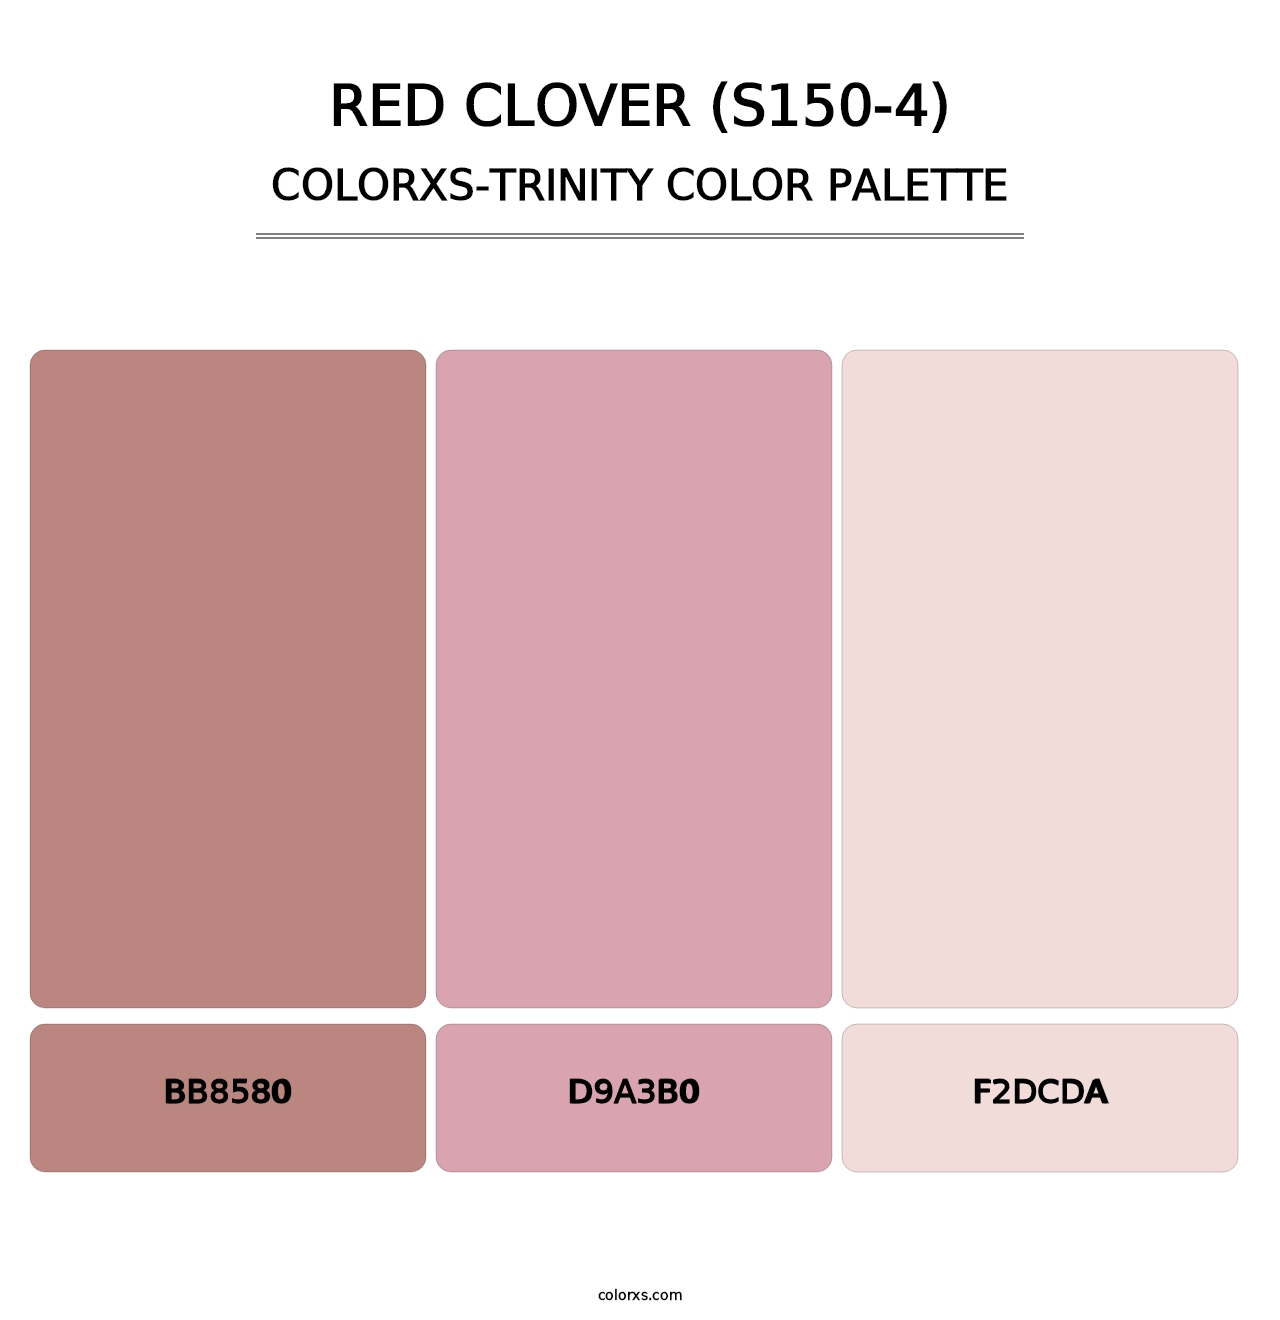 Red Clover (S150-4) - Colorxs Trinity Palette